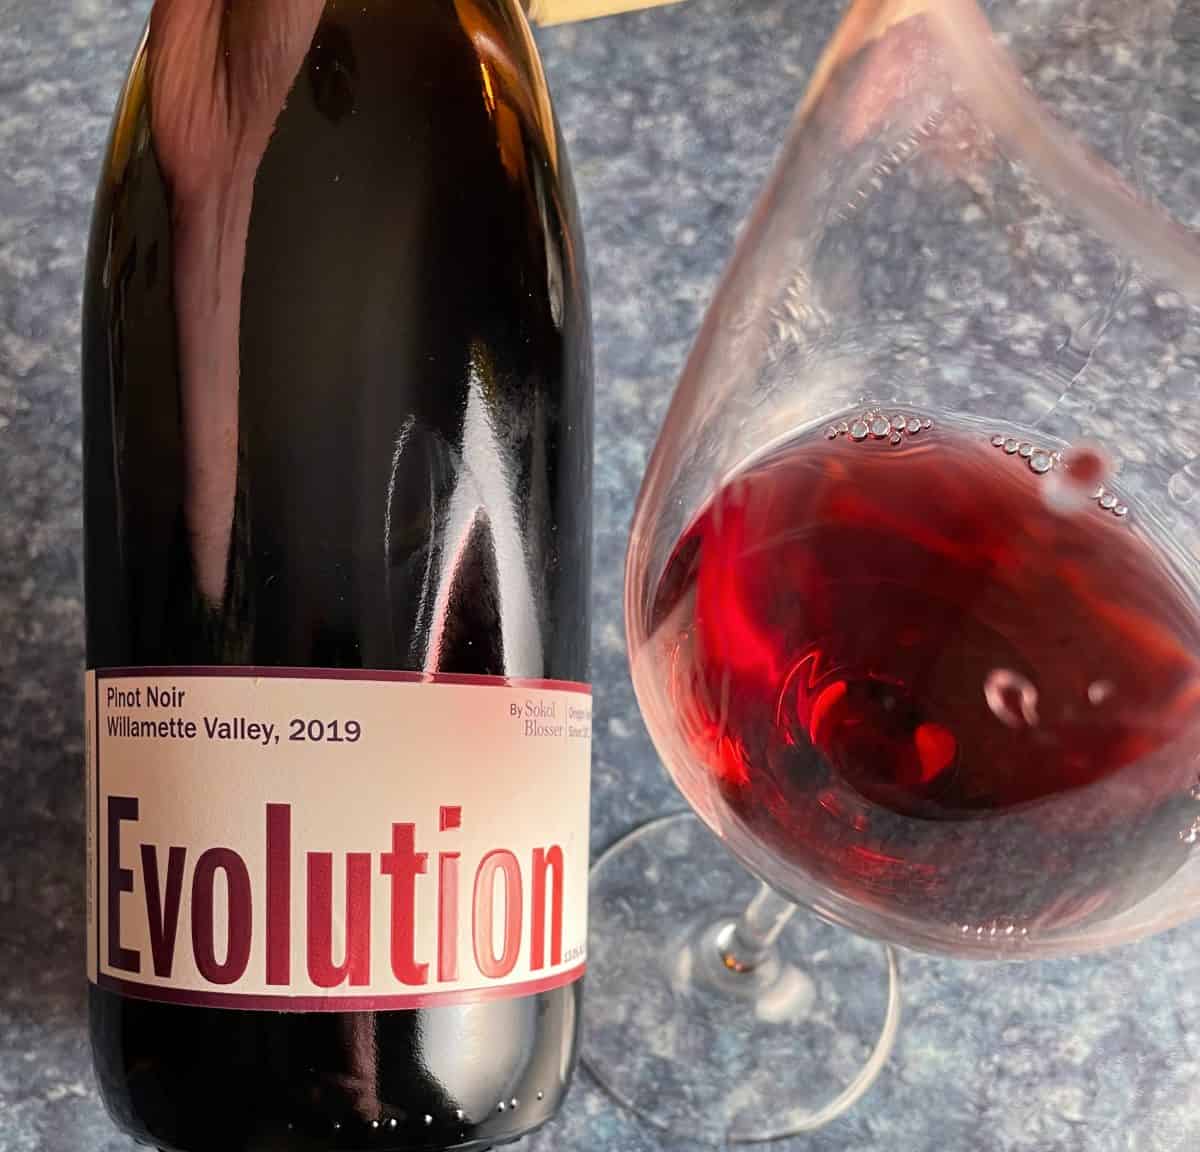 Bottle of Evolution Pinot Noir alongside a glass of this red wine. 